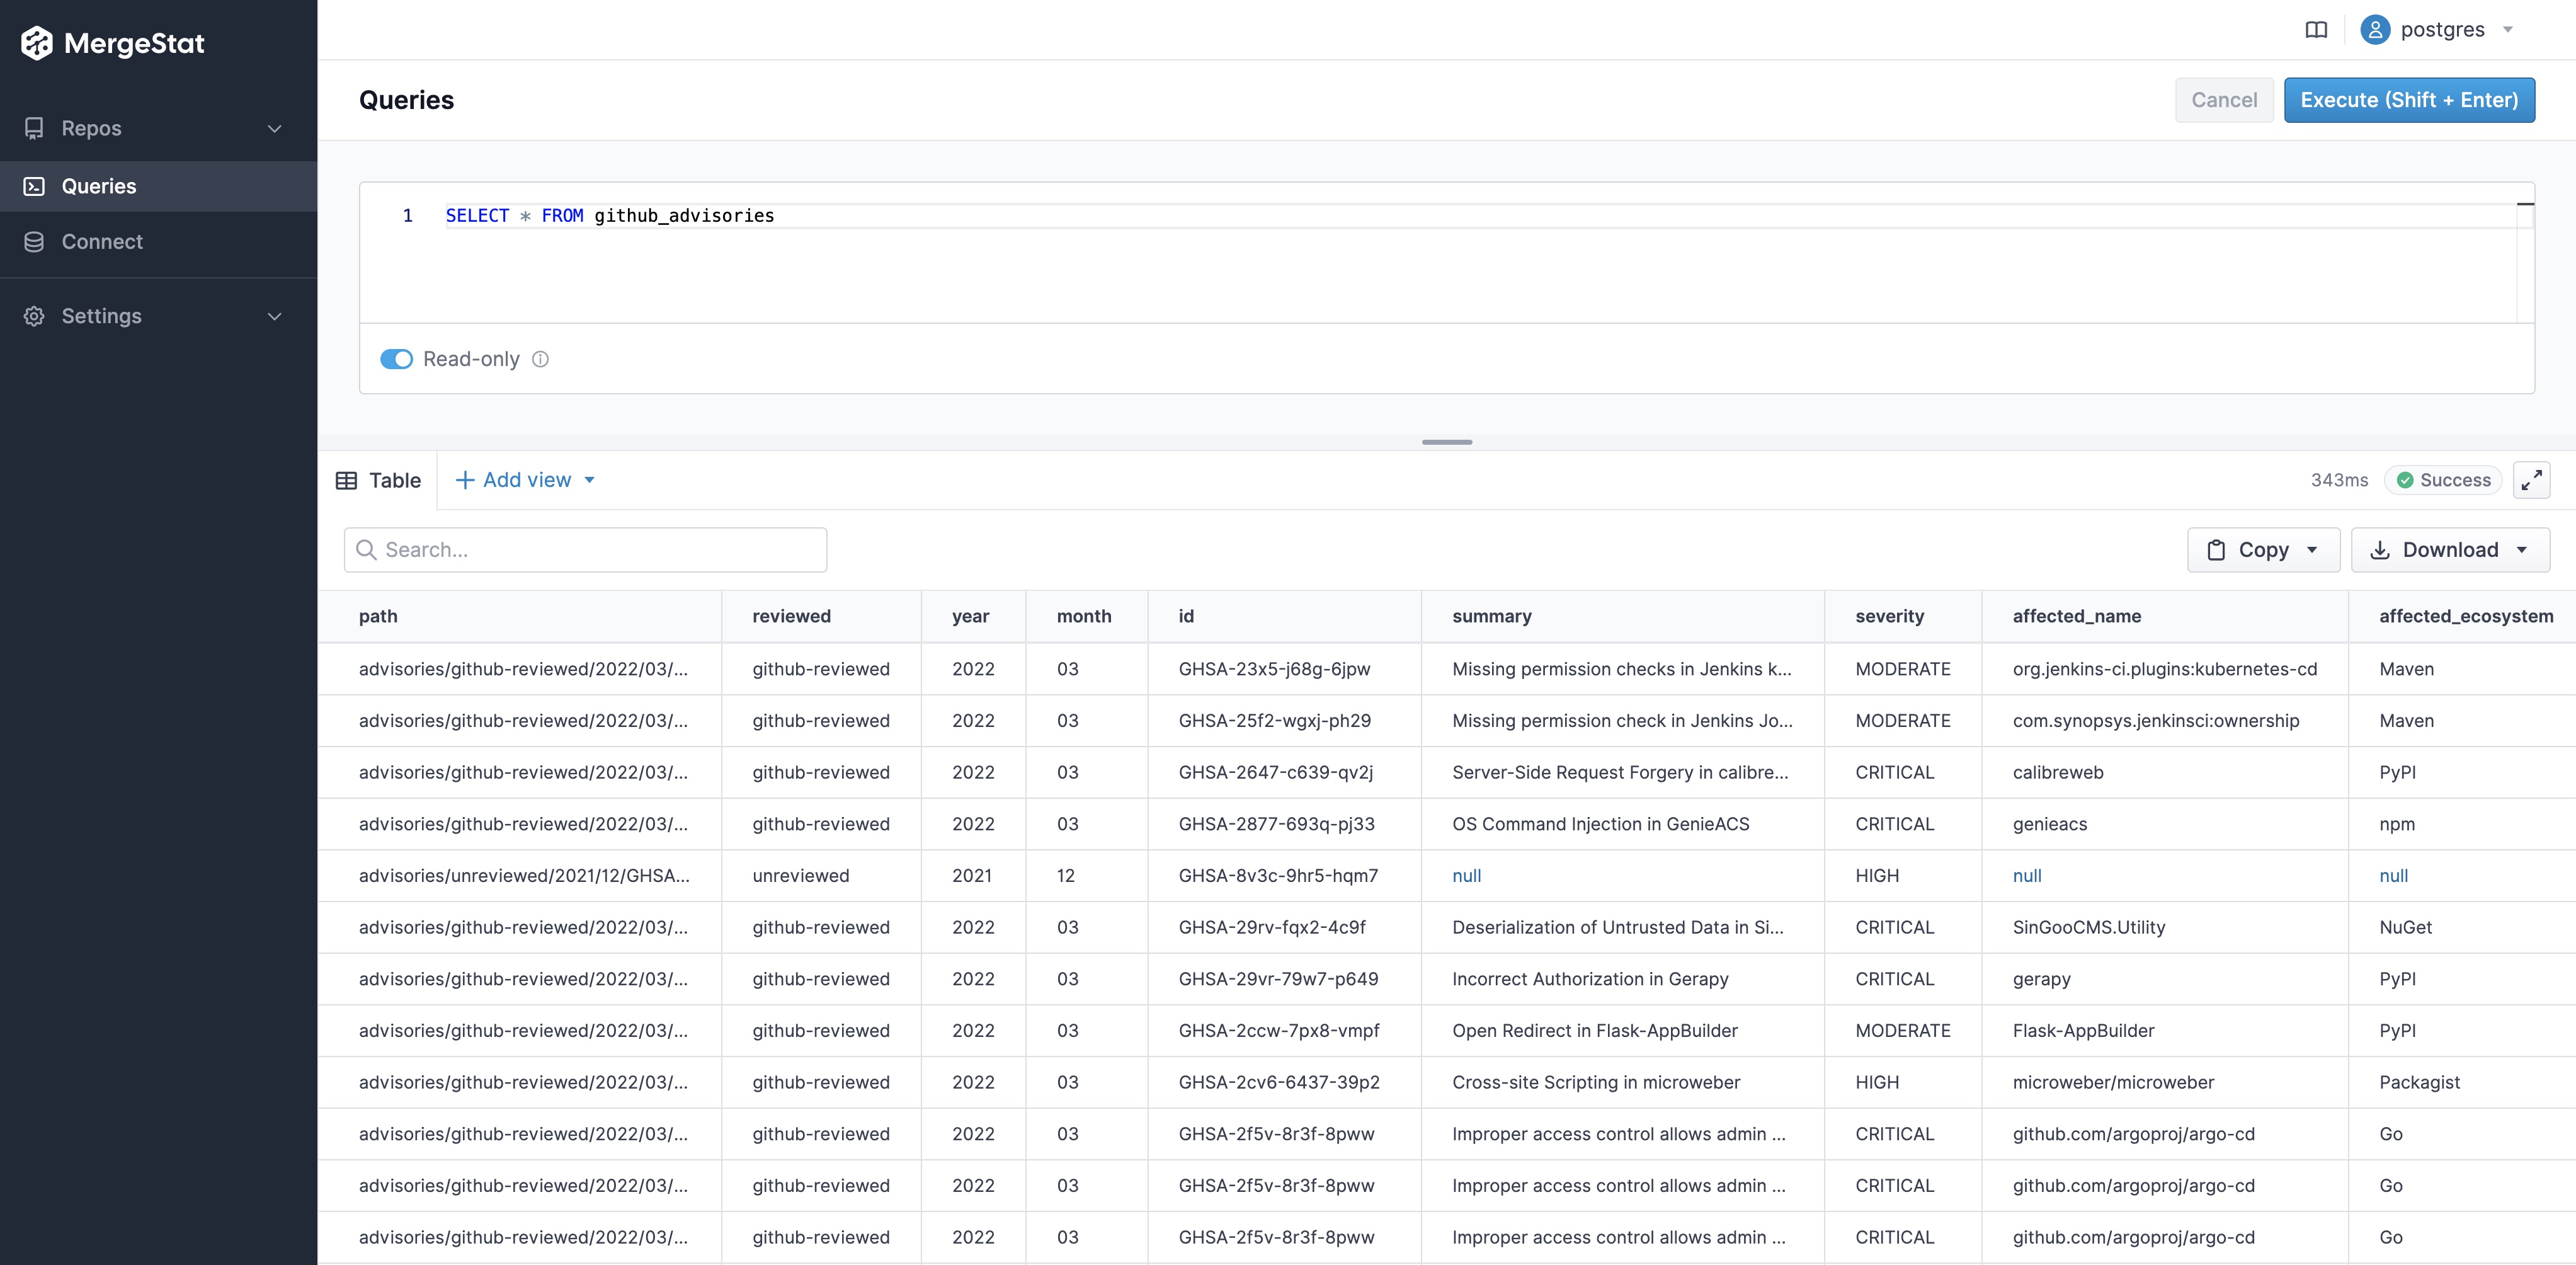 Screenshot of the MergeStat app running a SQL query to list all advisories